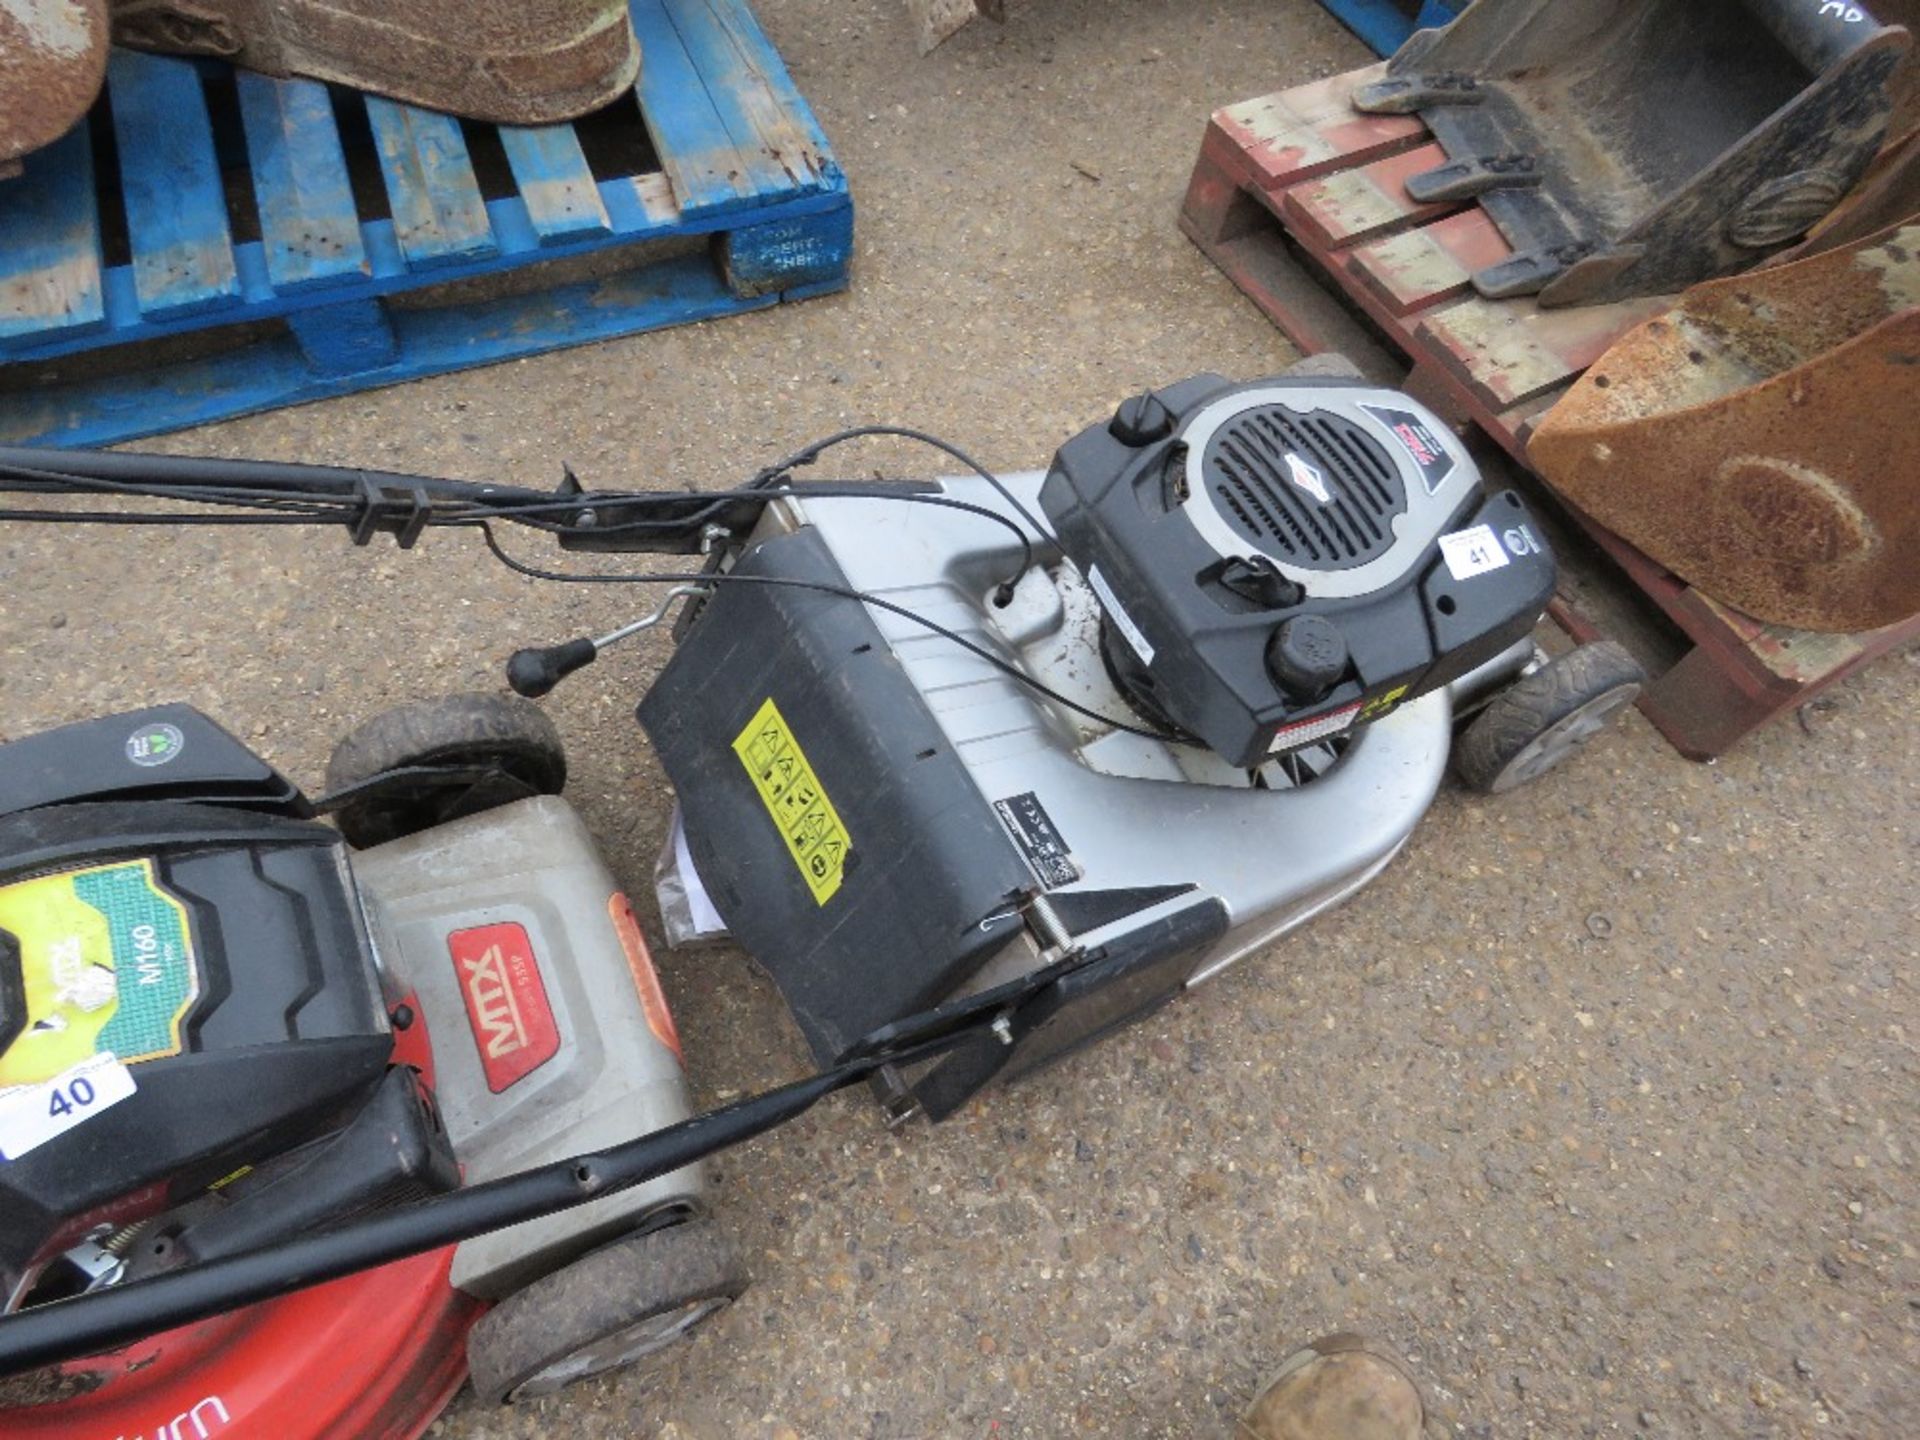 LAWNFLITE ROLLER PETROL ENGINED MOWER. NO VAT ON THE HAMMER PRICE OF THIS ITEM.